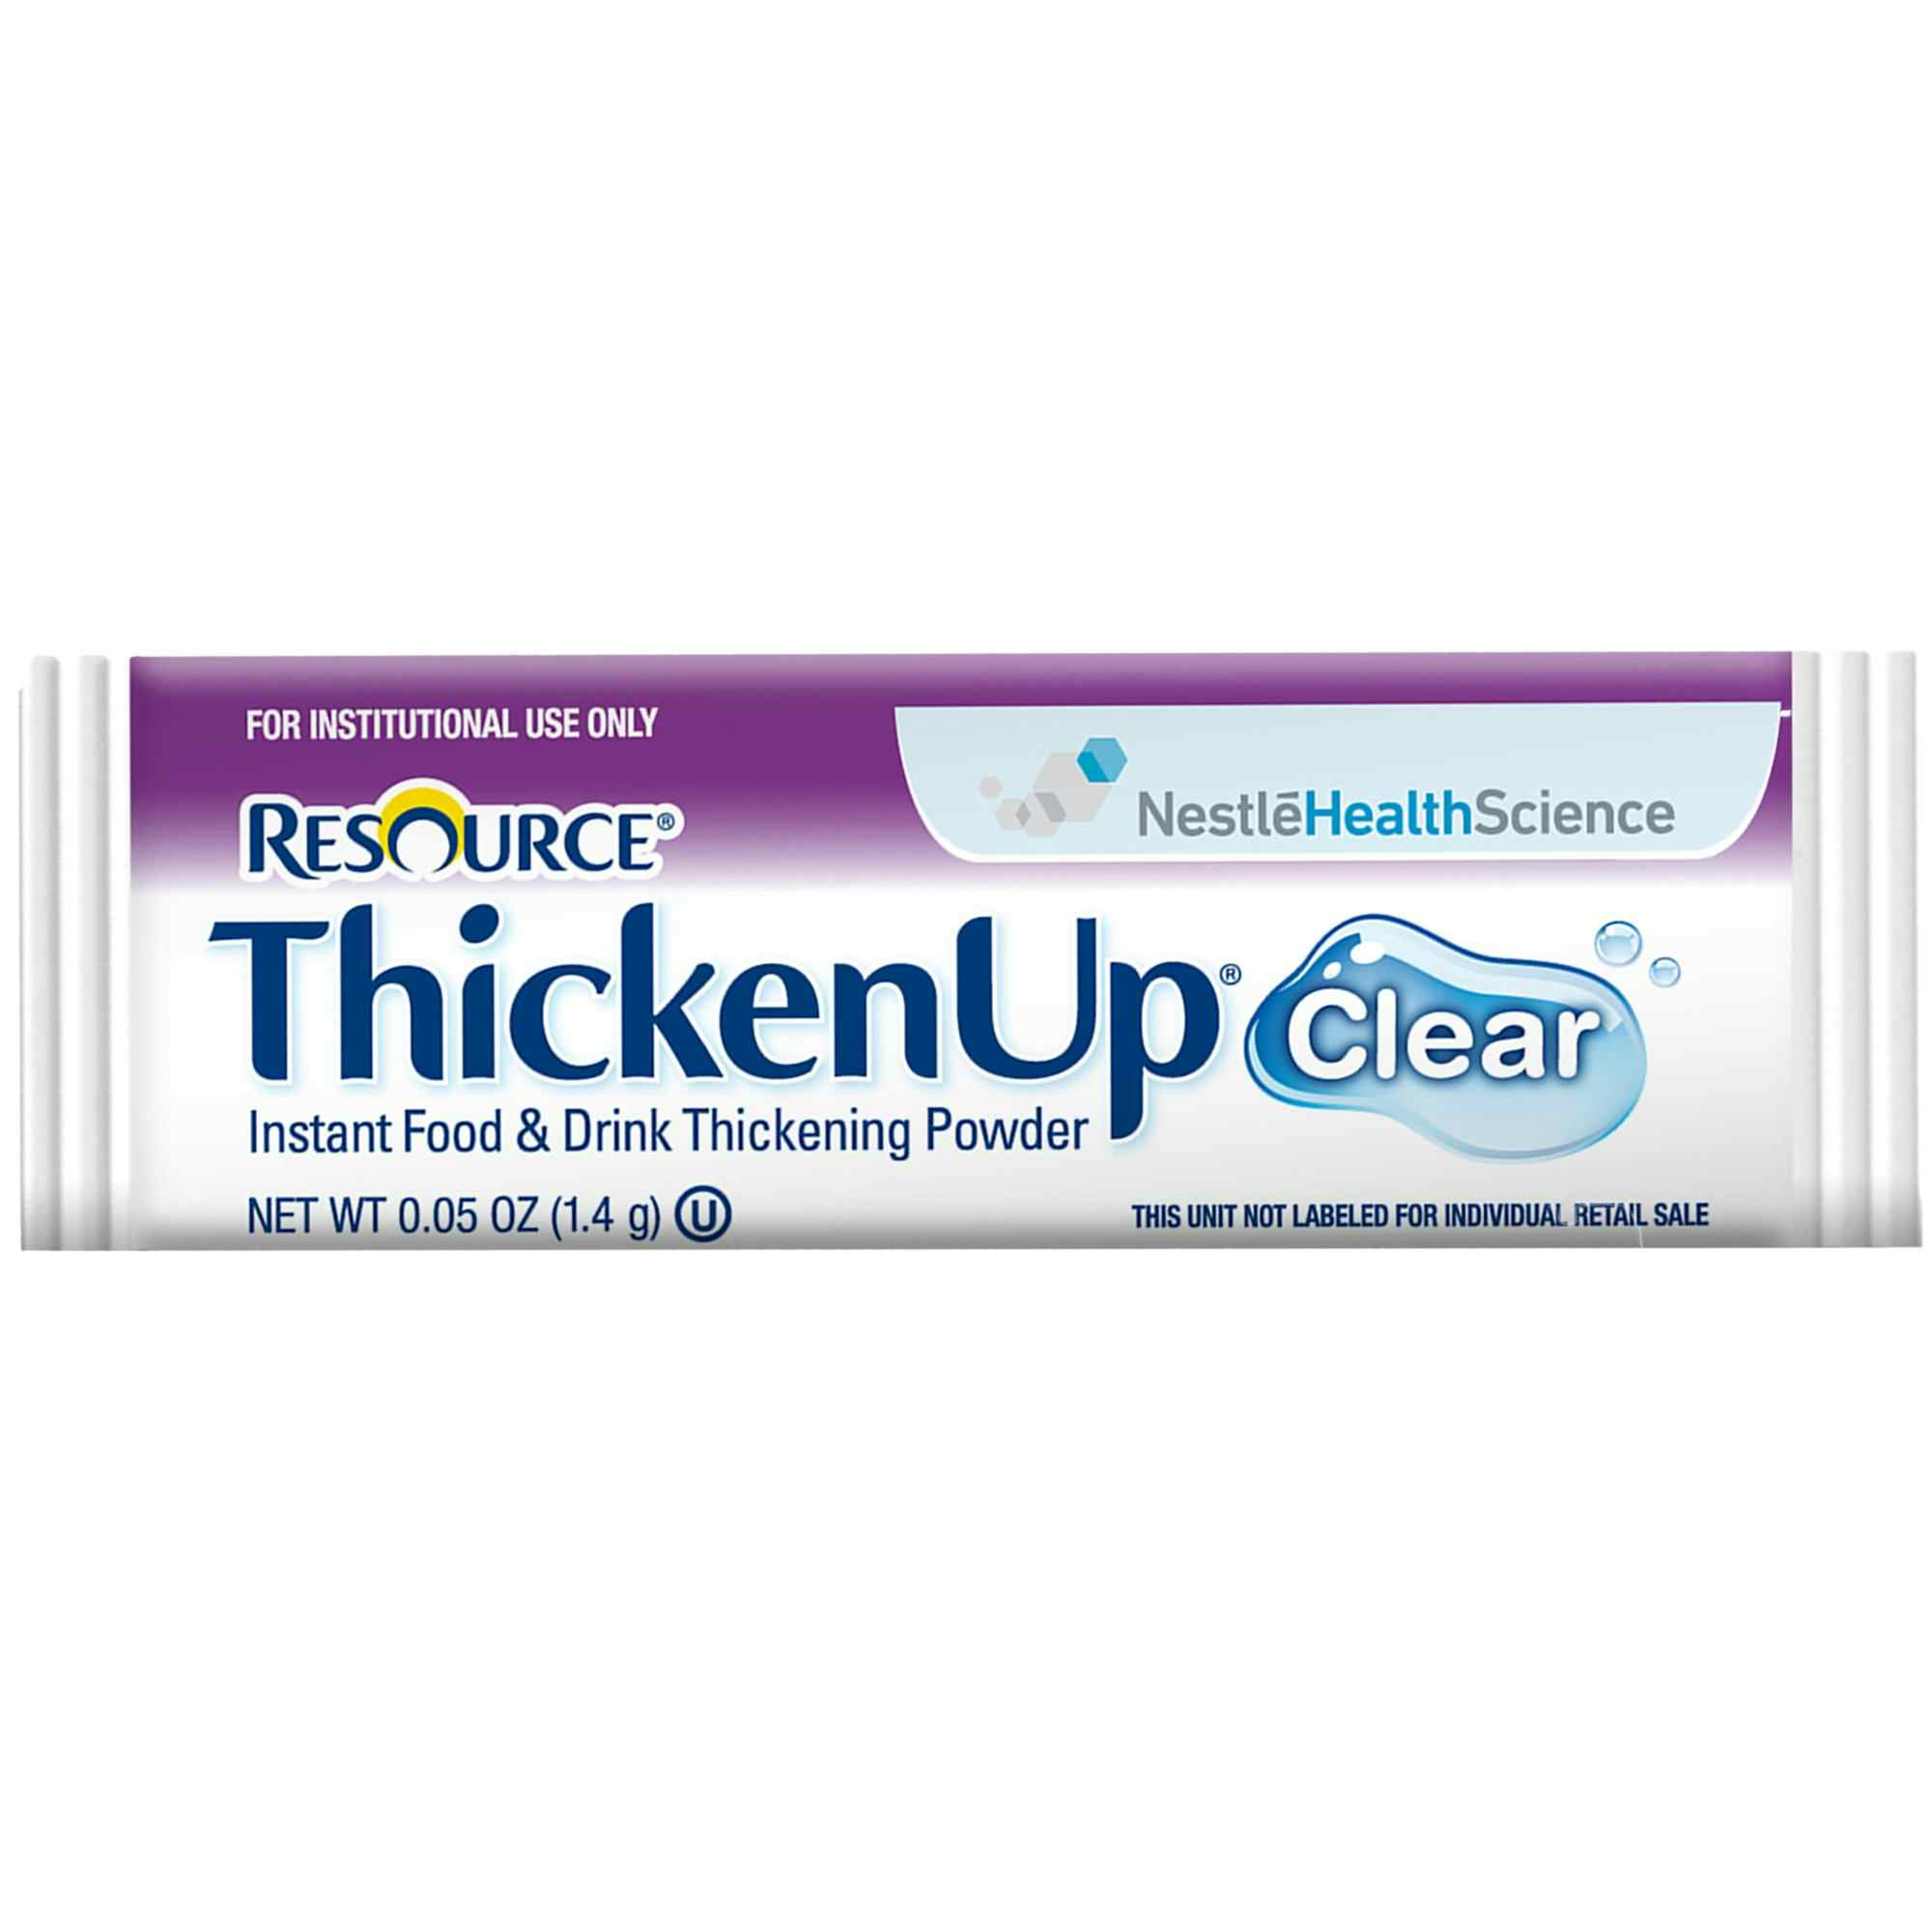 Resource Thickenup Clear Instant Food & Drink Thickening Powder, Packet, 4390015193, Case of 288